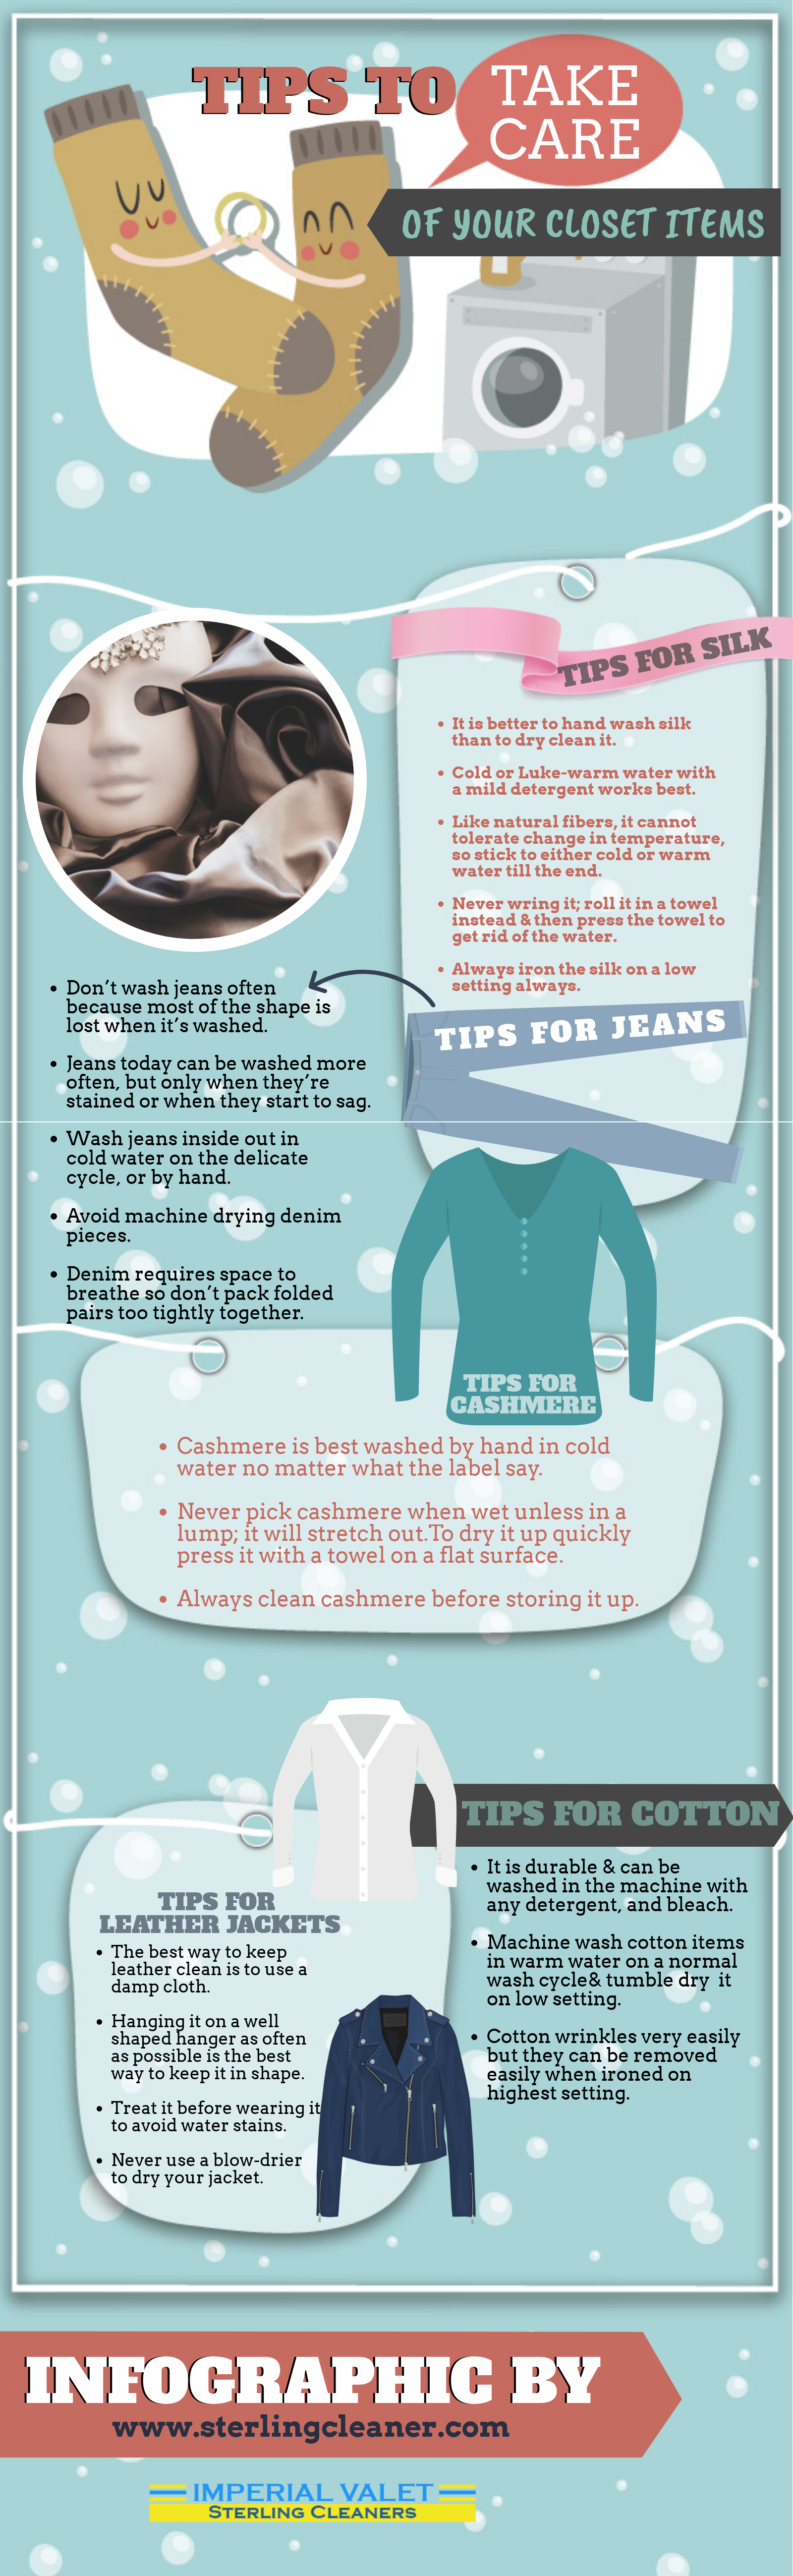 Tips To Take Care of Your Closet Items